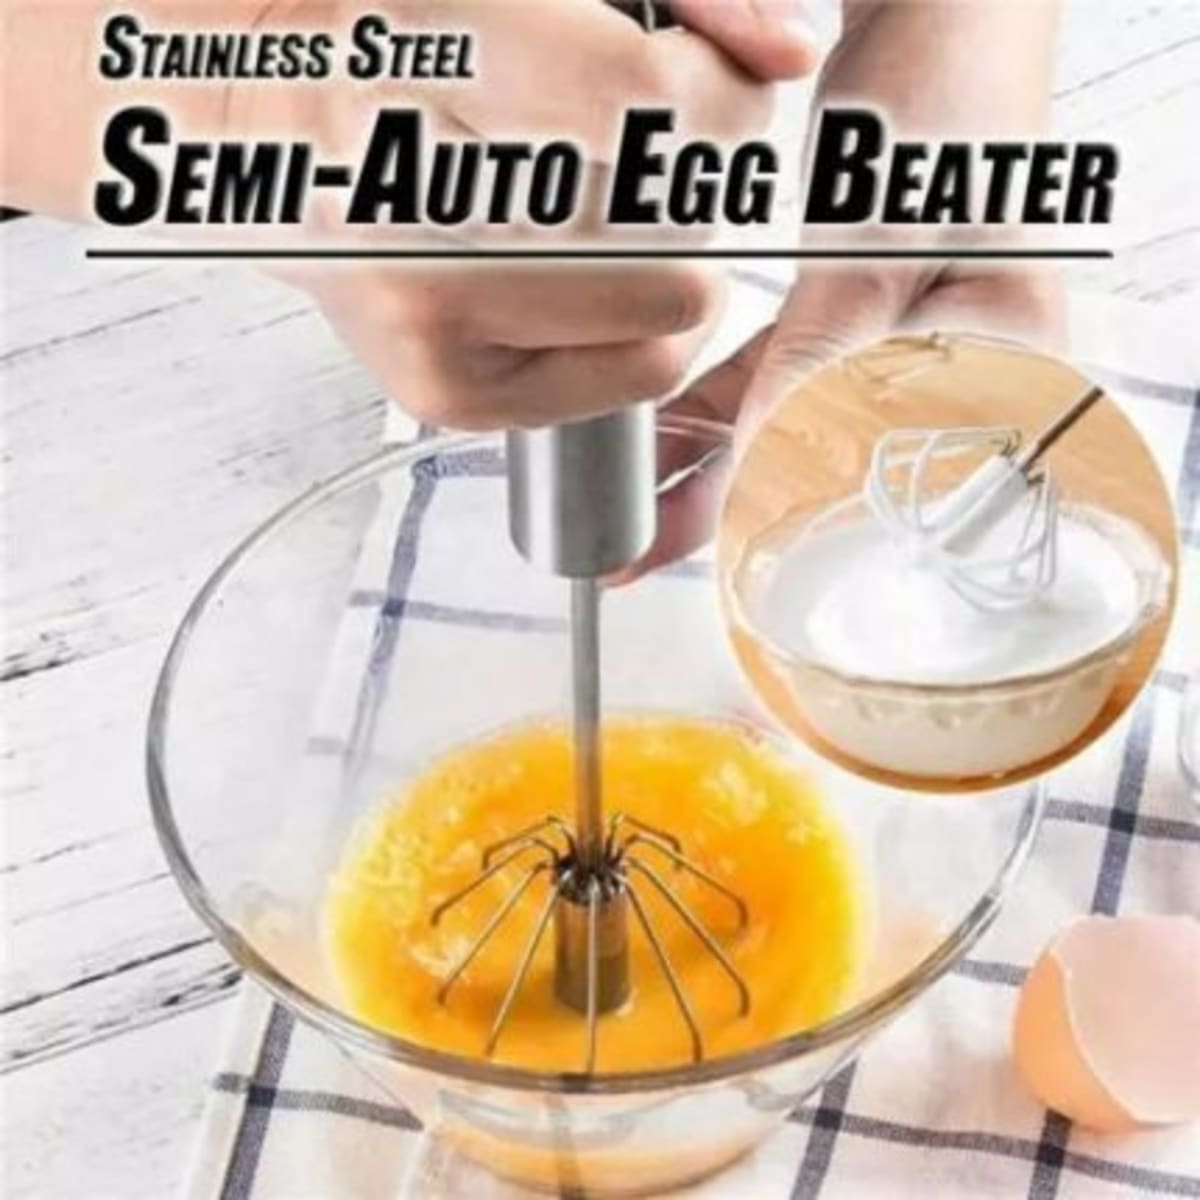 1 Pcs Stainless Steel Semi-automatic Egg Beater Manual Hand Mixer